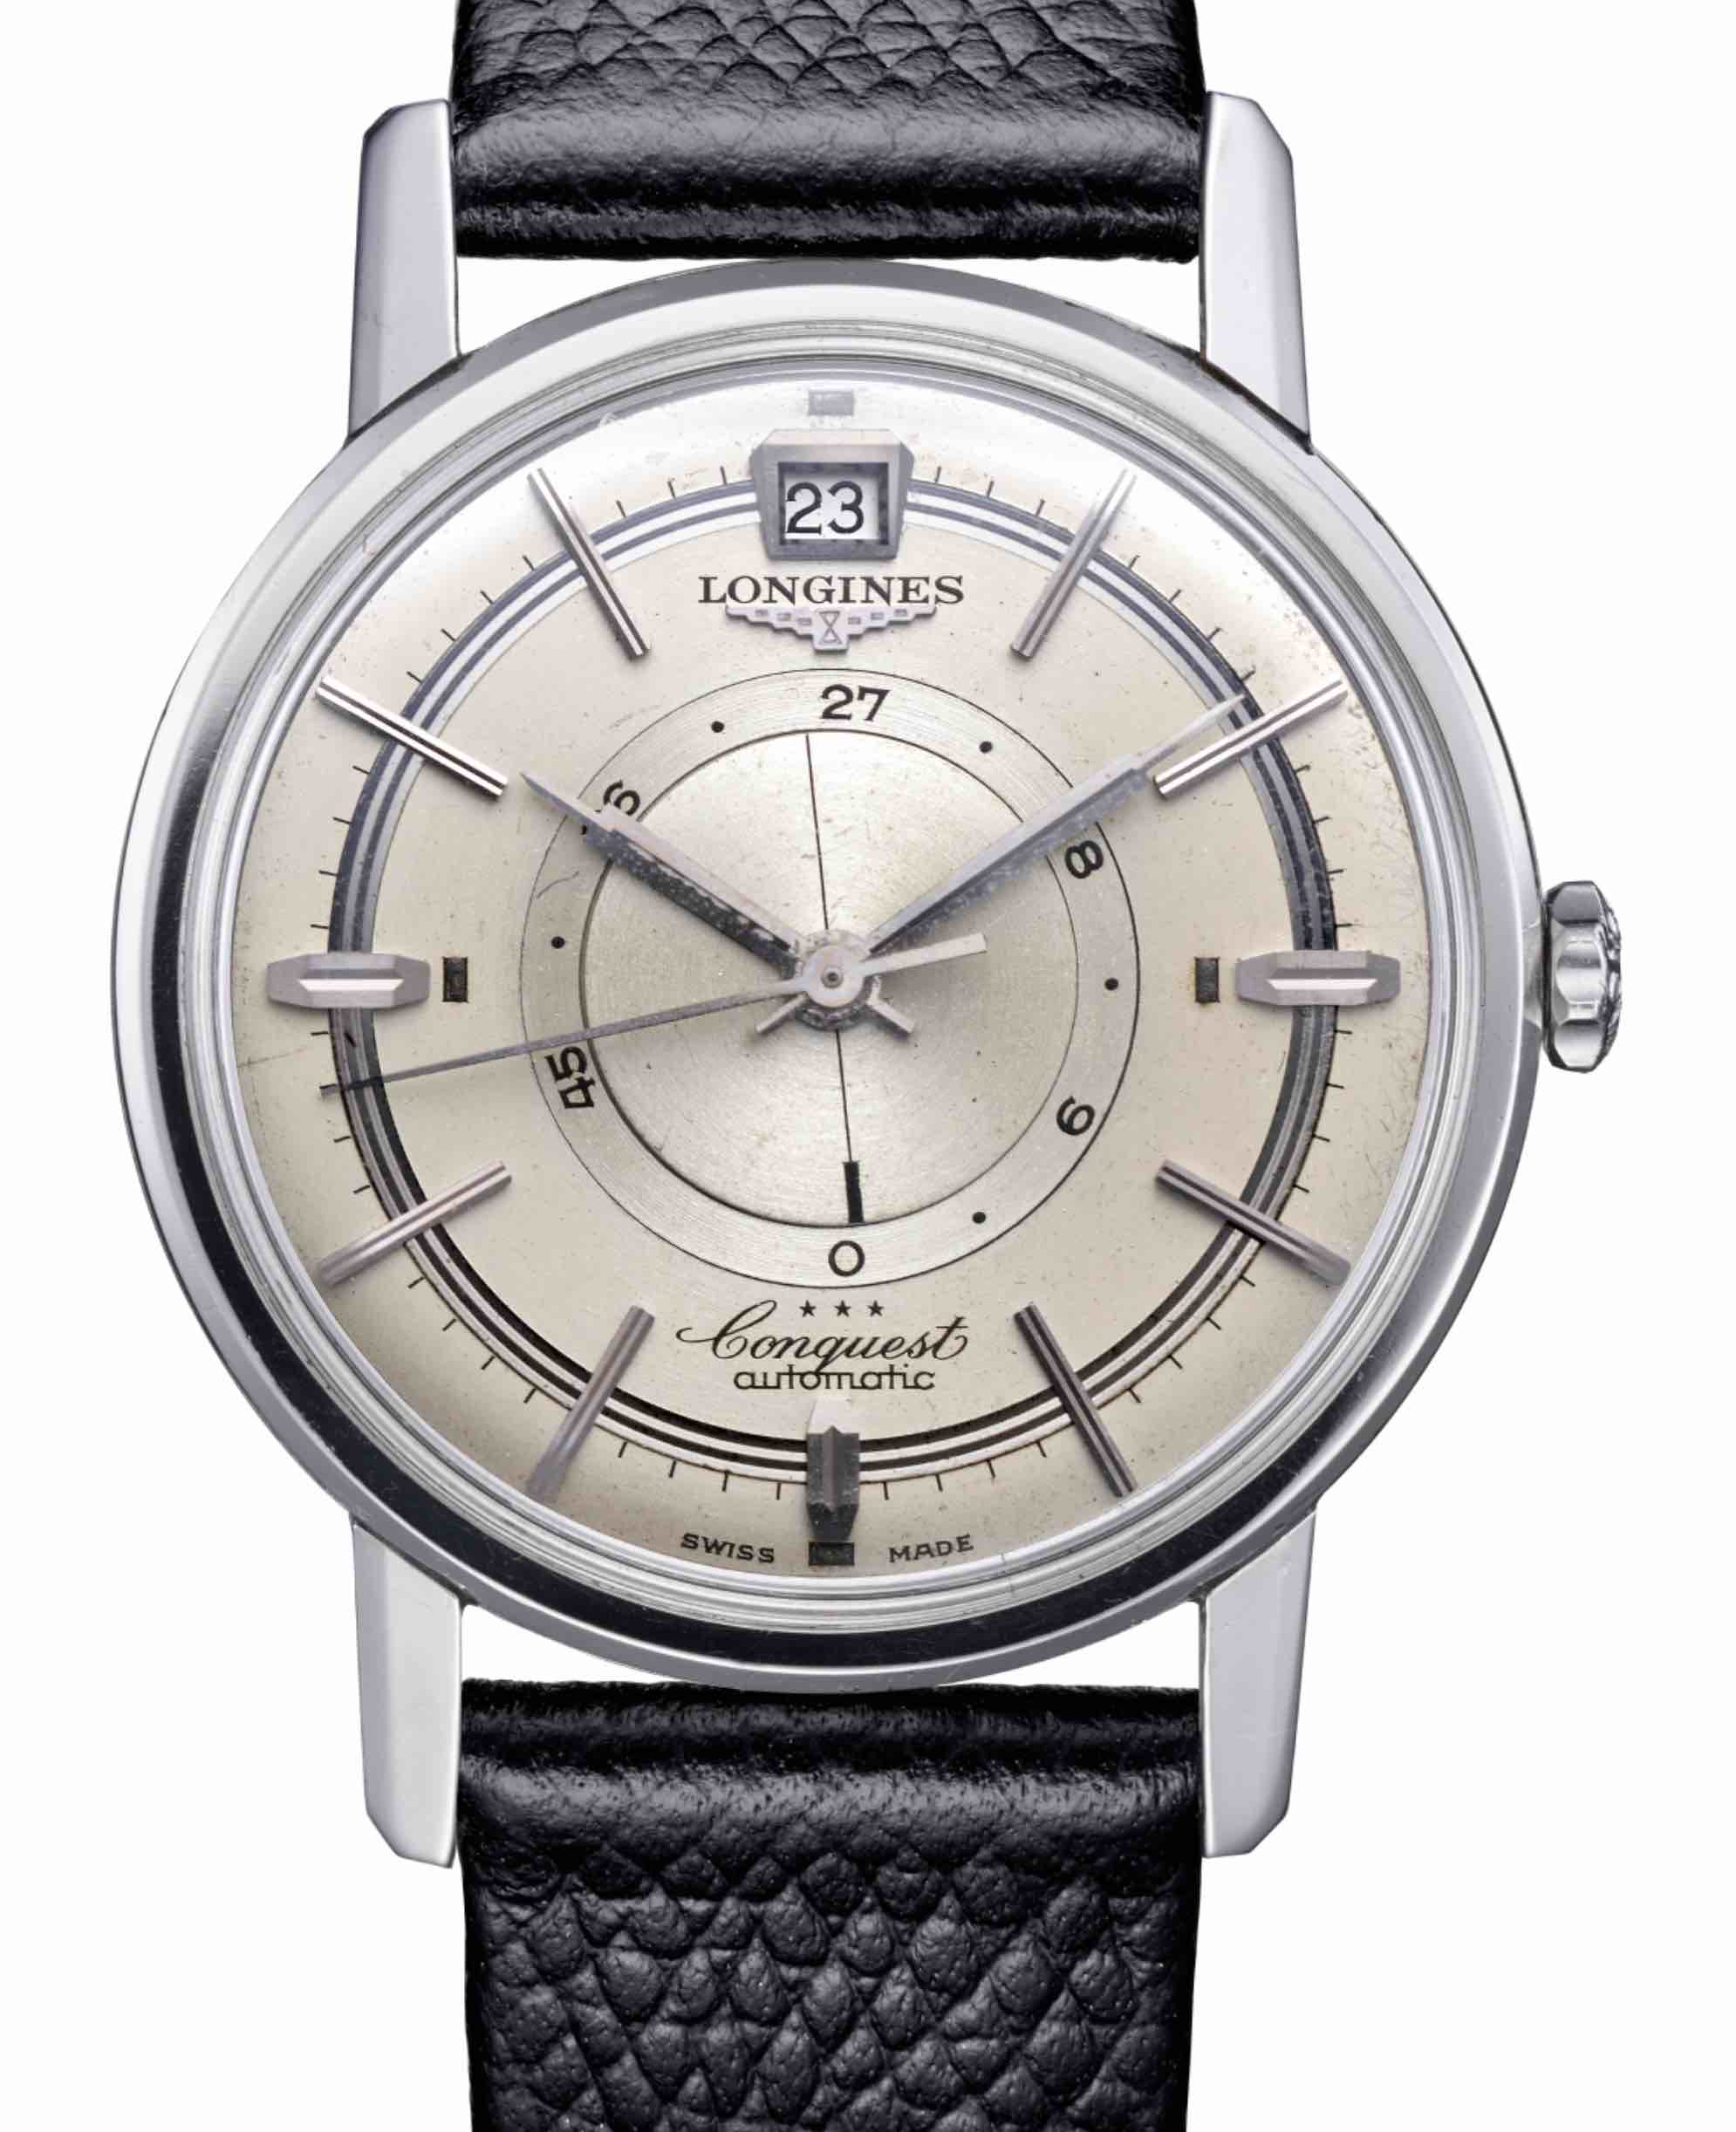 original 1959 model of the Longines Conquest Heritage Central Power Reserve